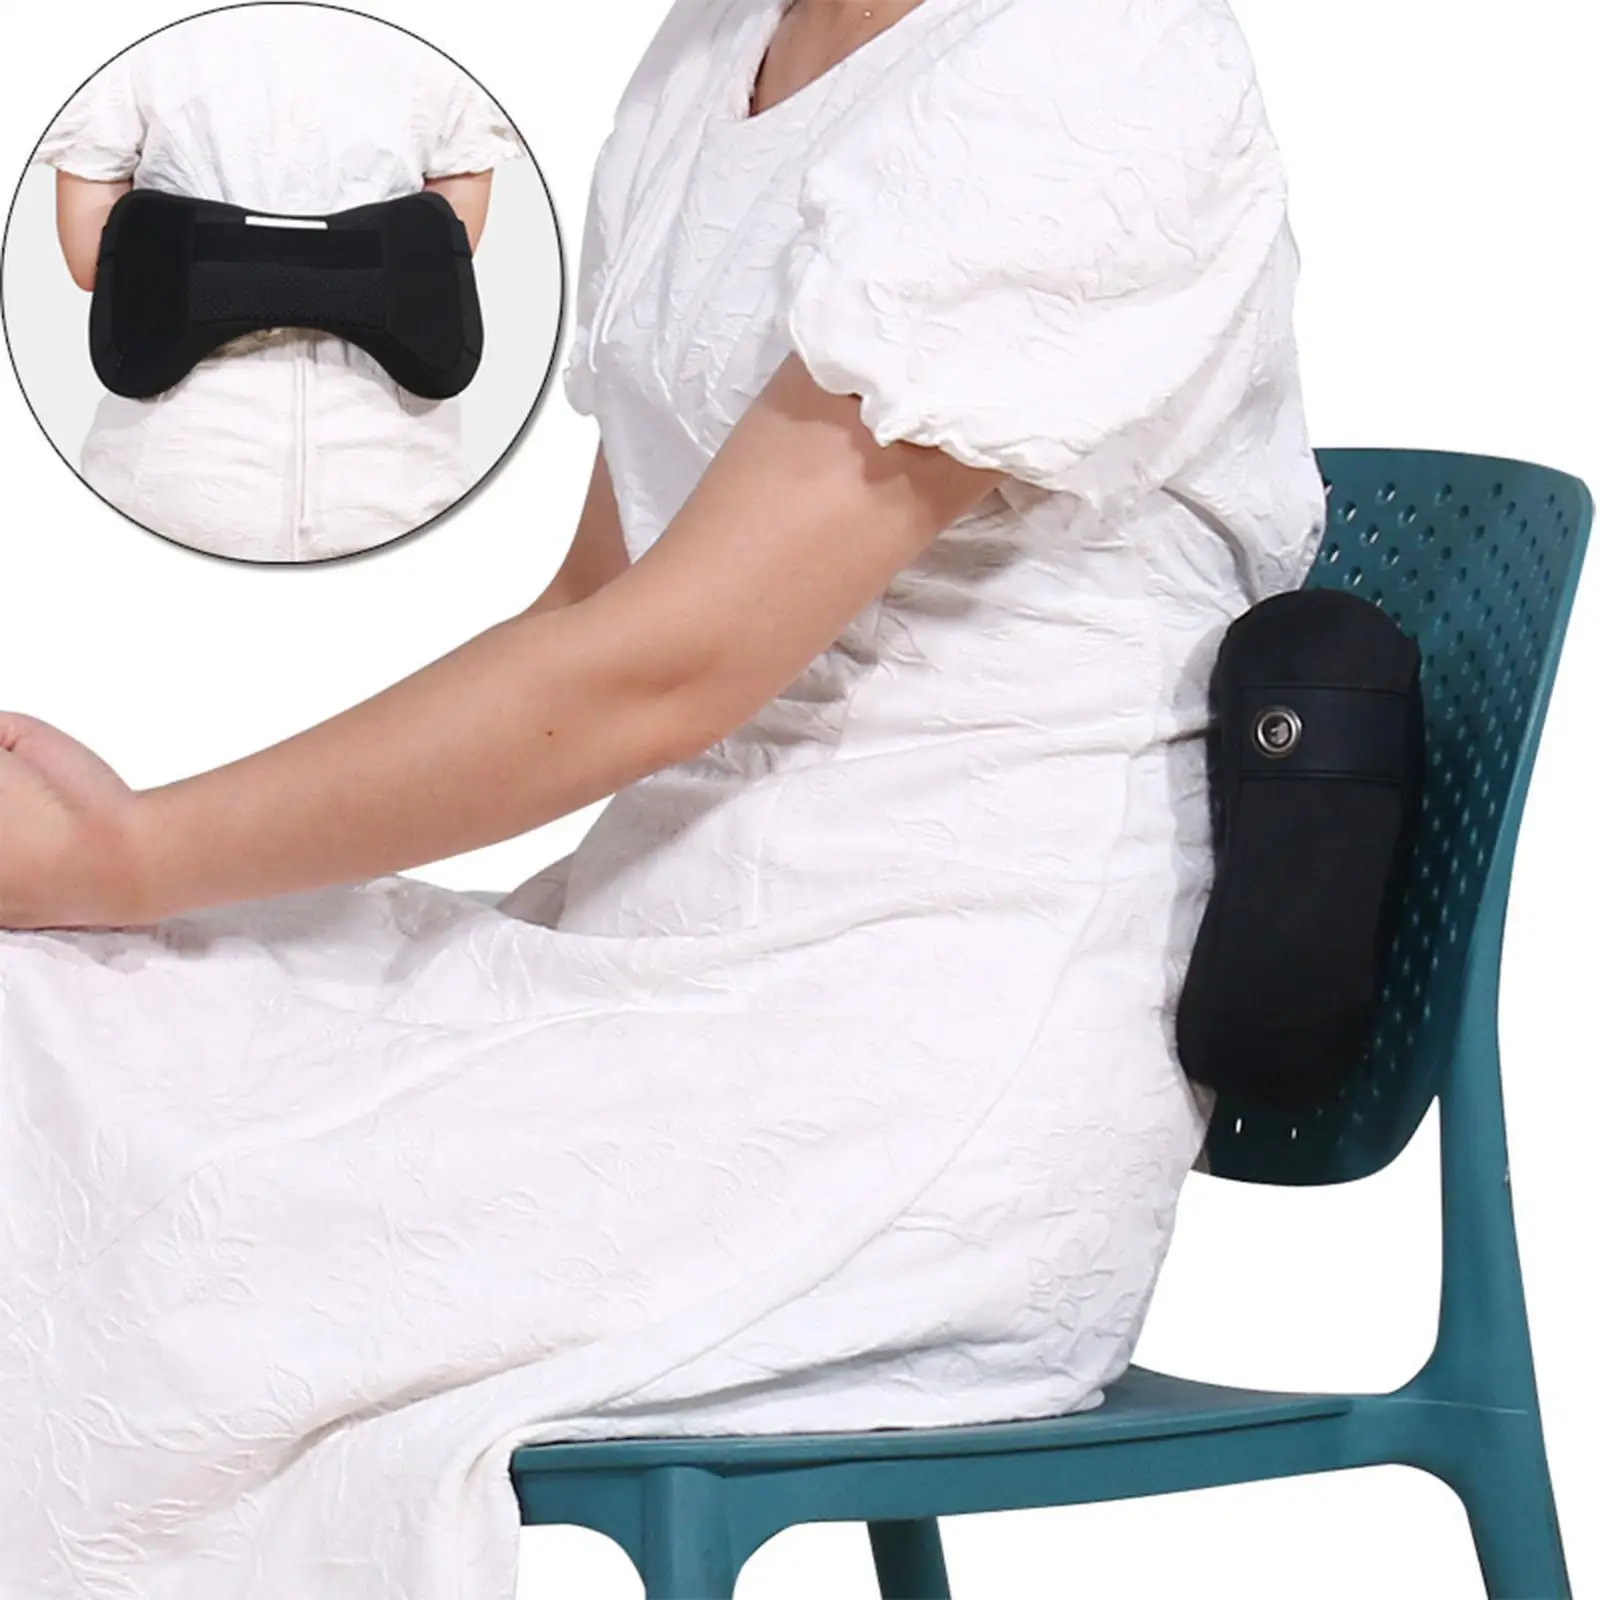 U Shaped Travel Neck Pillow with Removable Cover Comfortable for Flights